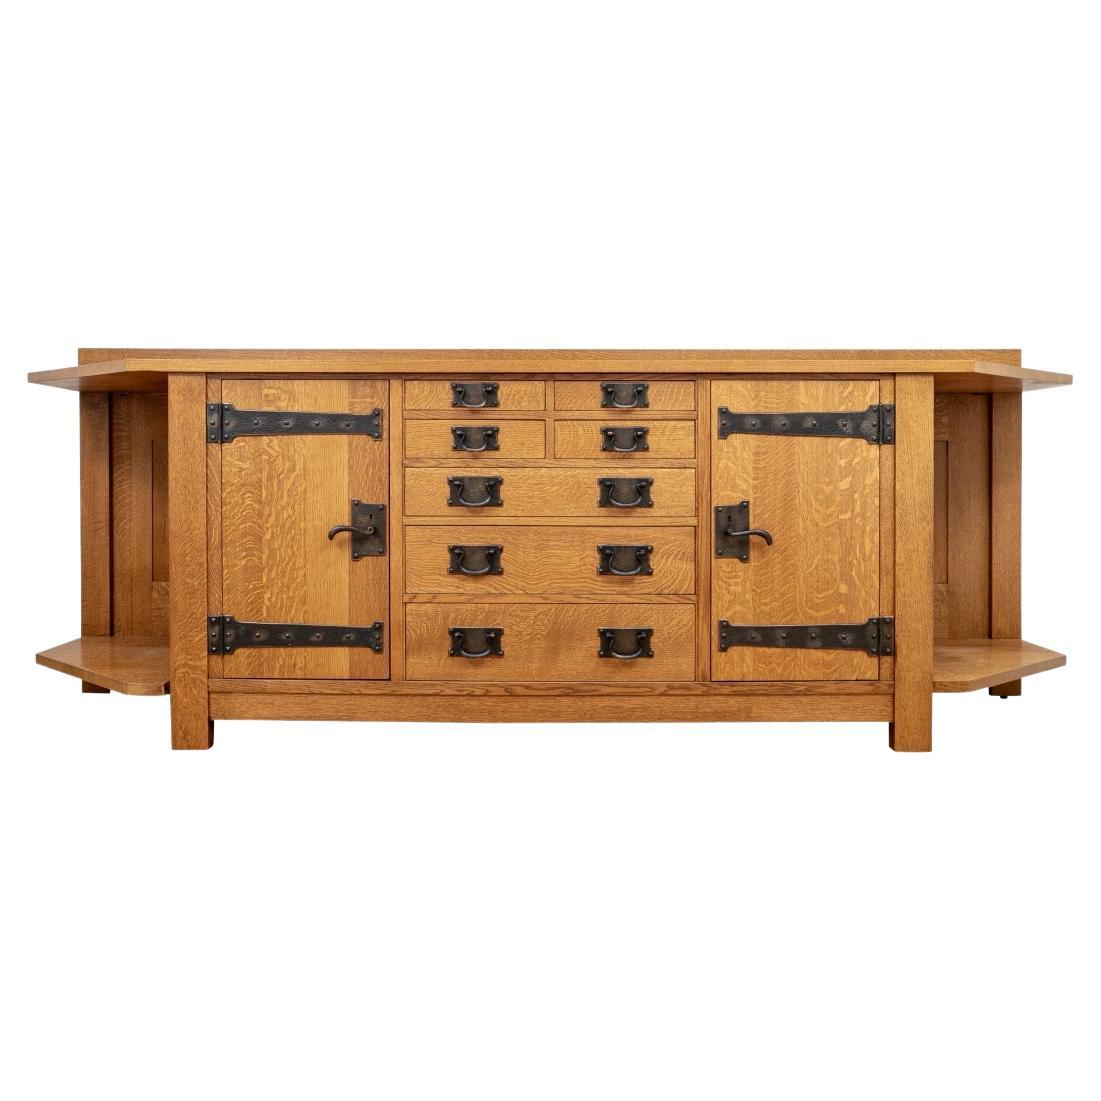 L & JG Stickley Limited Edition Columbus Ave Sideboard